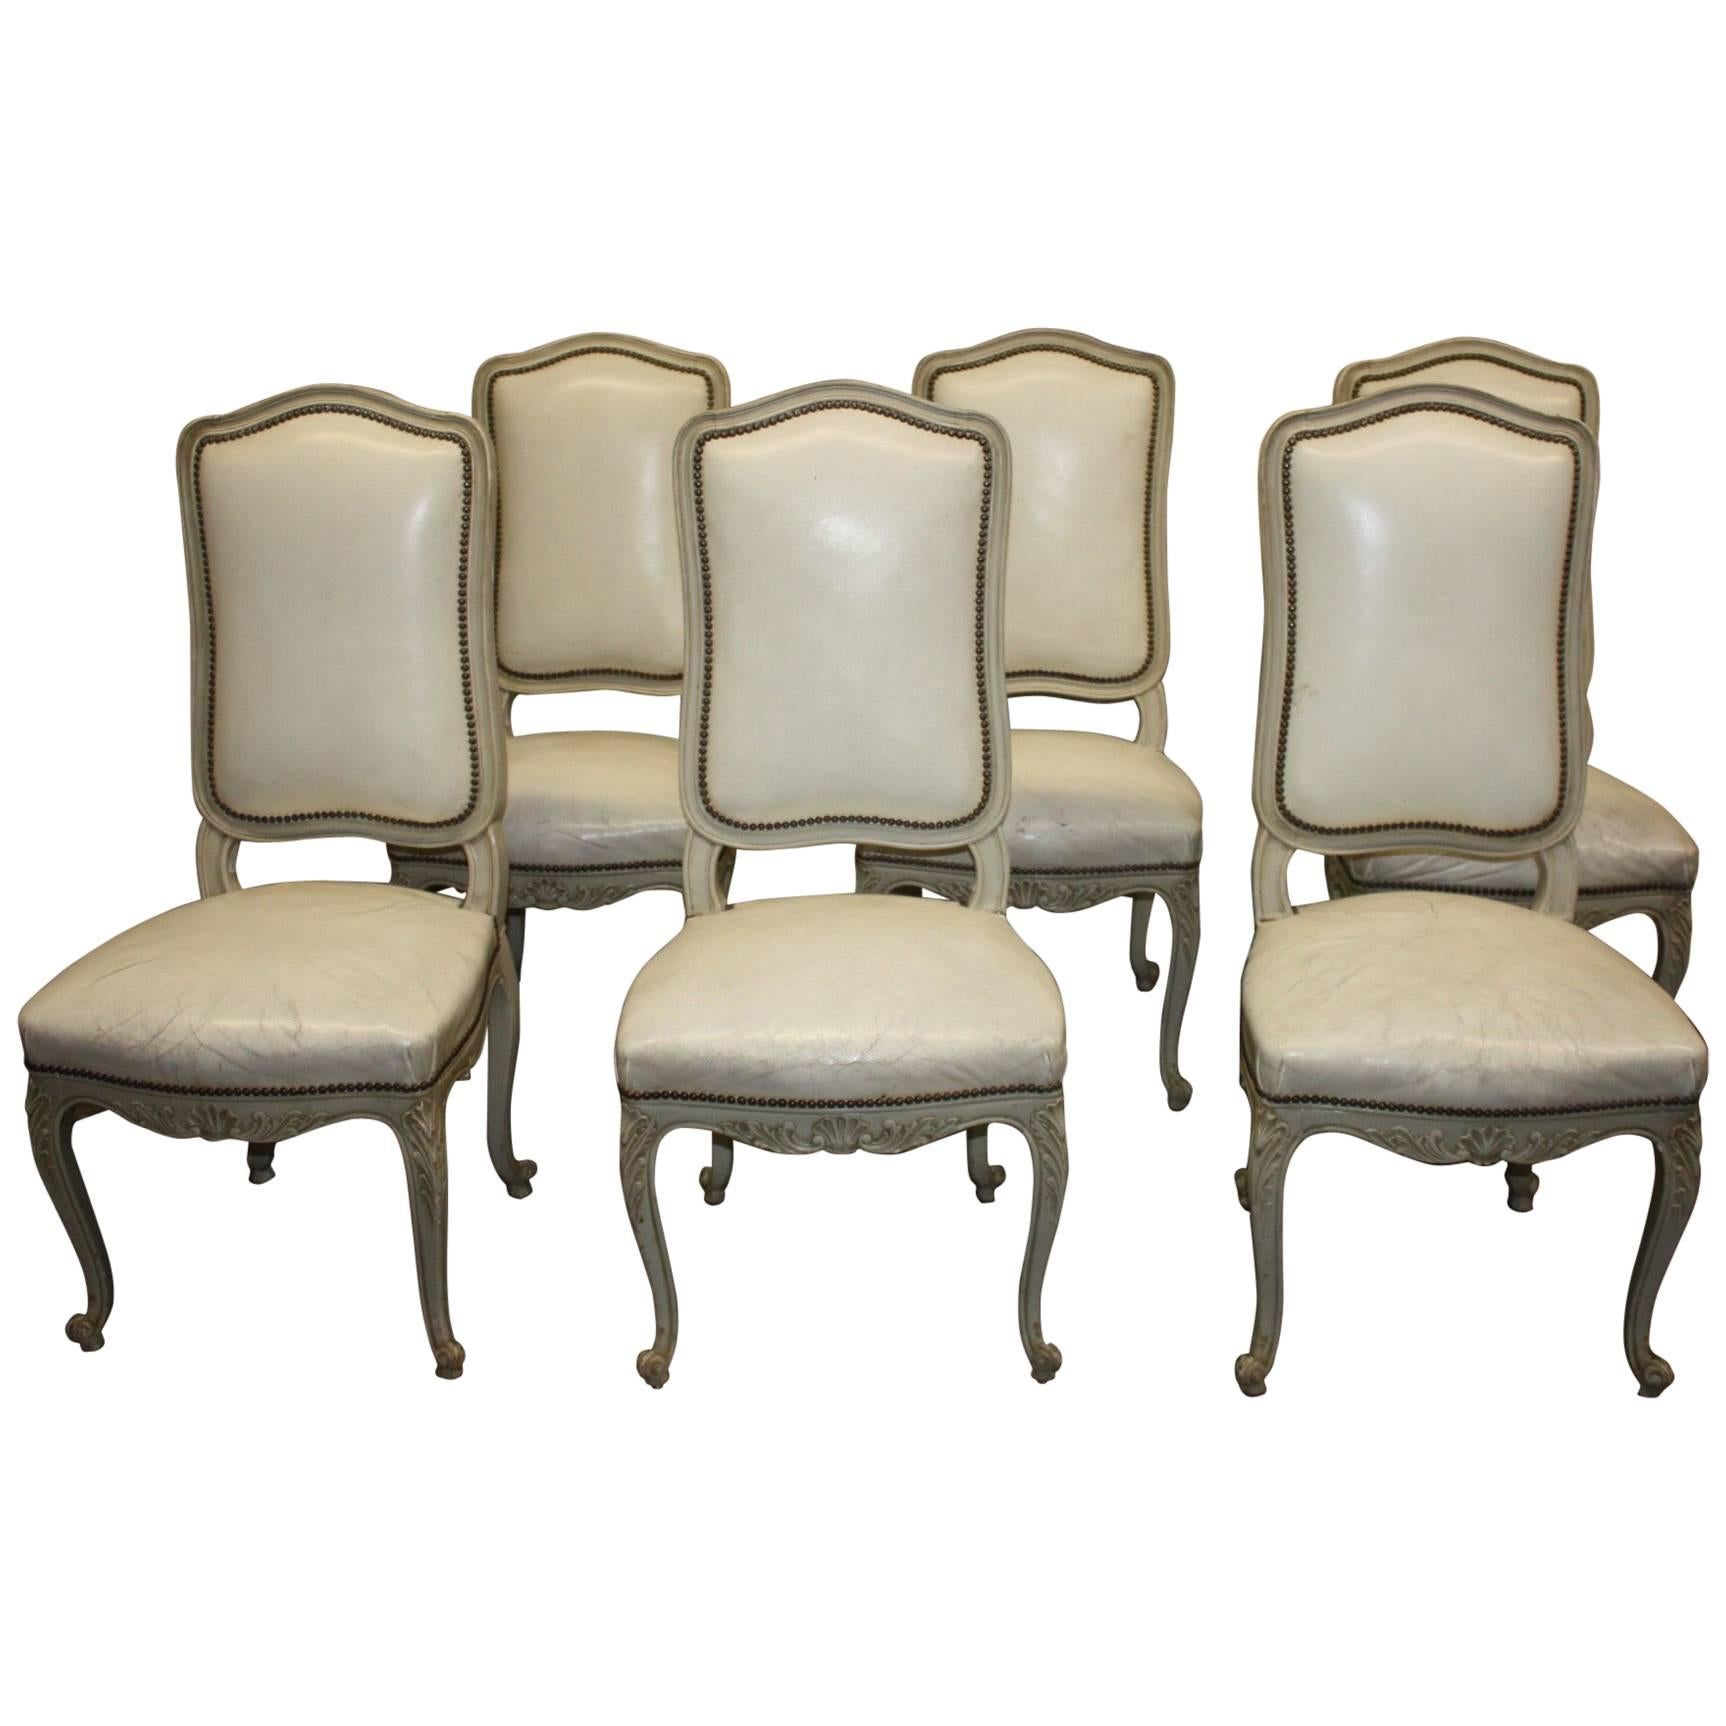 Exquisite 19th Century Italian Painted Chairs